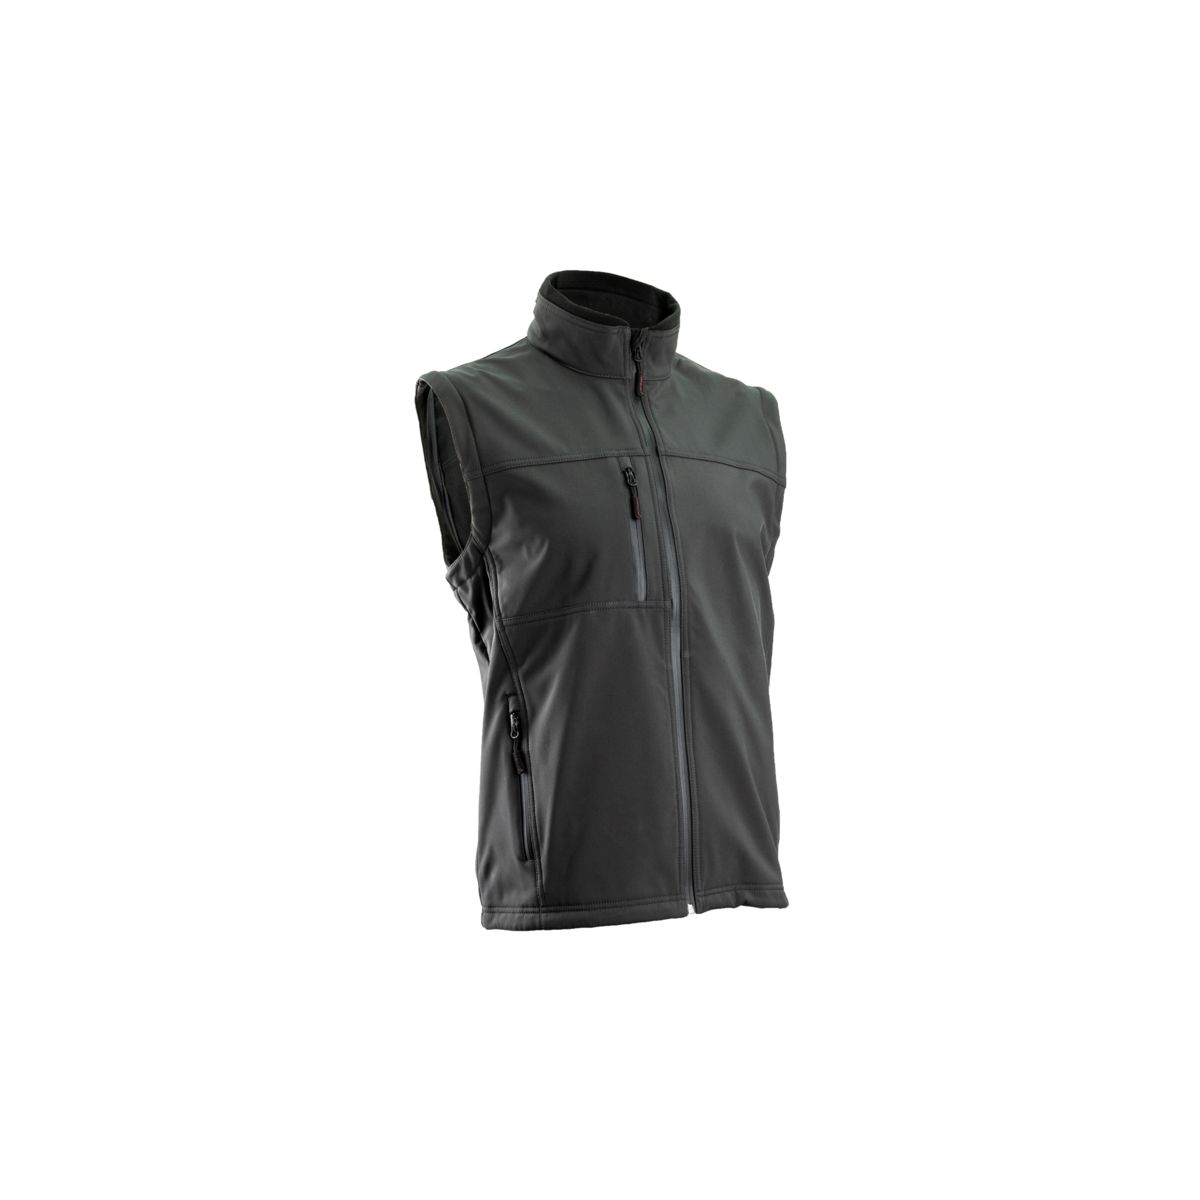 Veste Softshell COVERGUARD Yang - grise - Taille XL 1